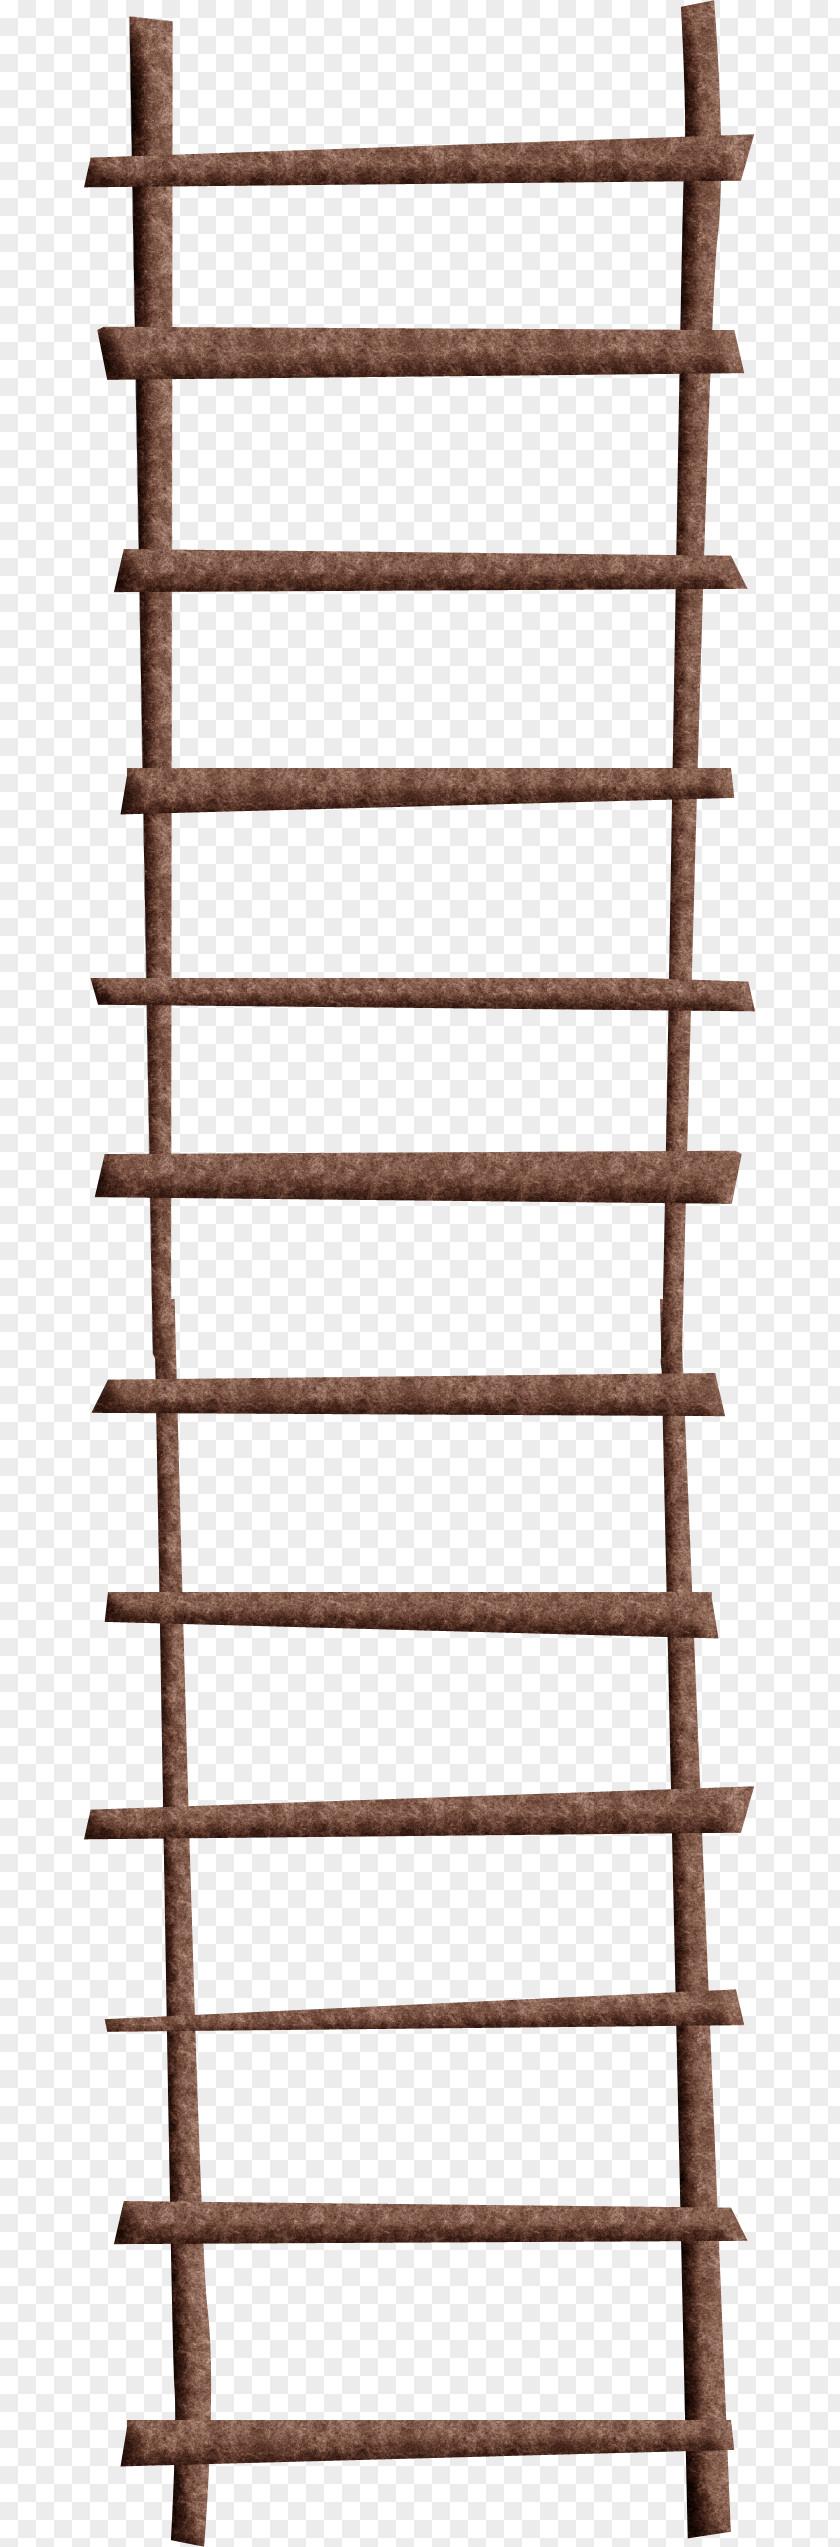 Cartoon Stairs Wood Ladder PNG